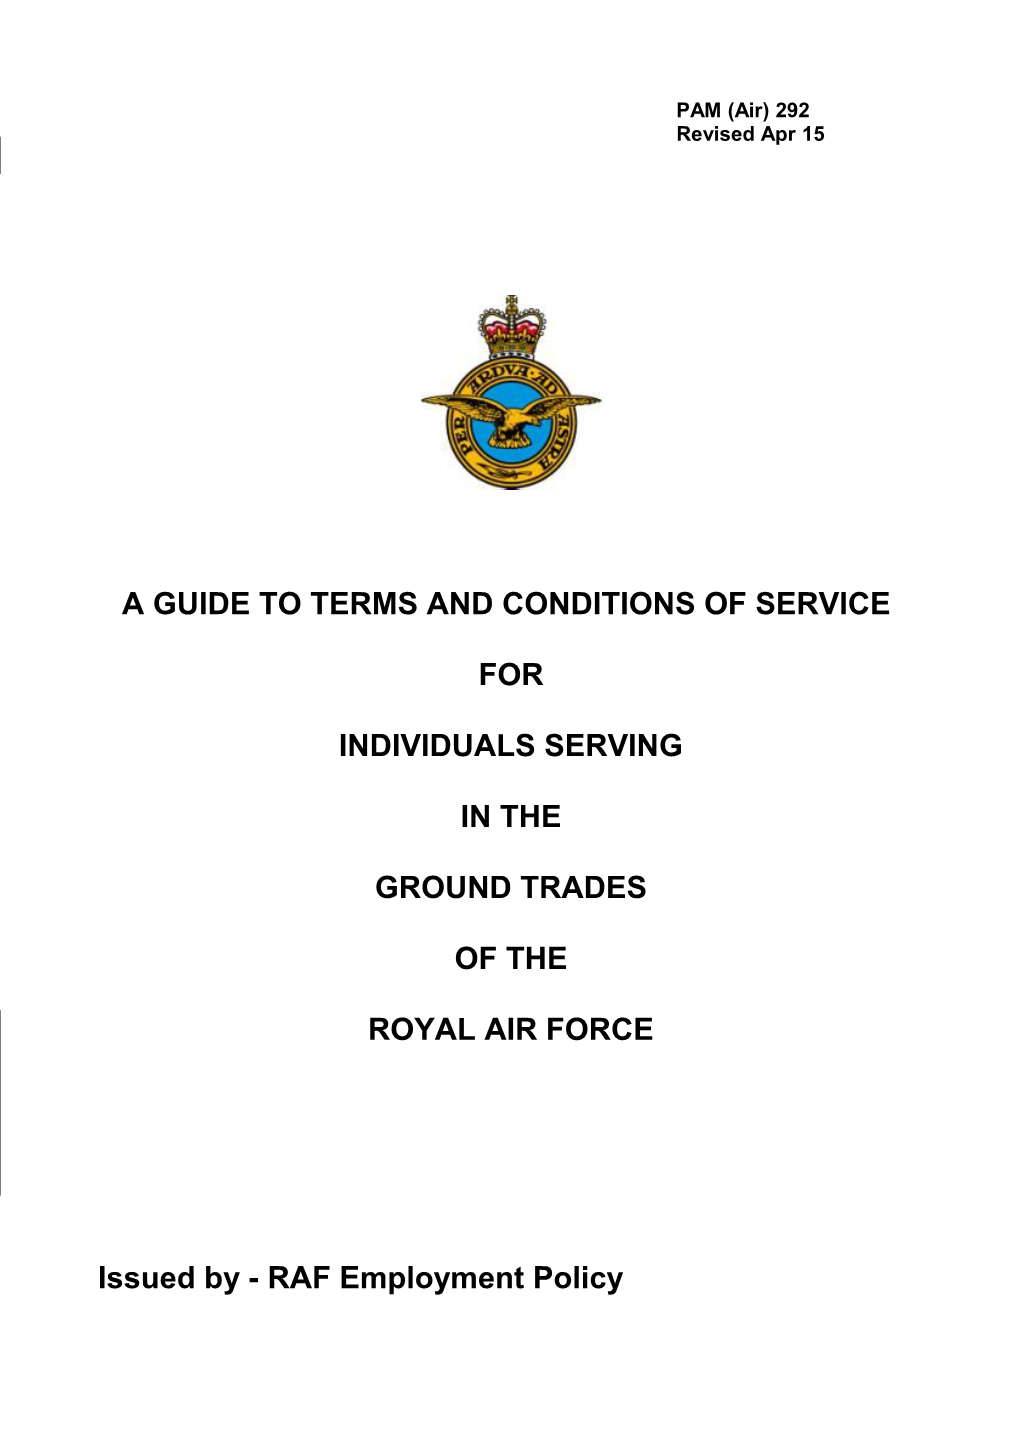 A Guide to Terms and Conditions of Service